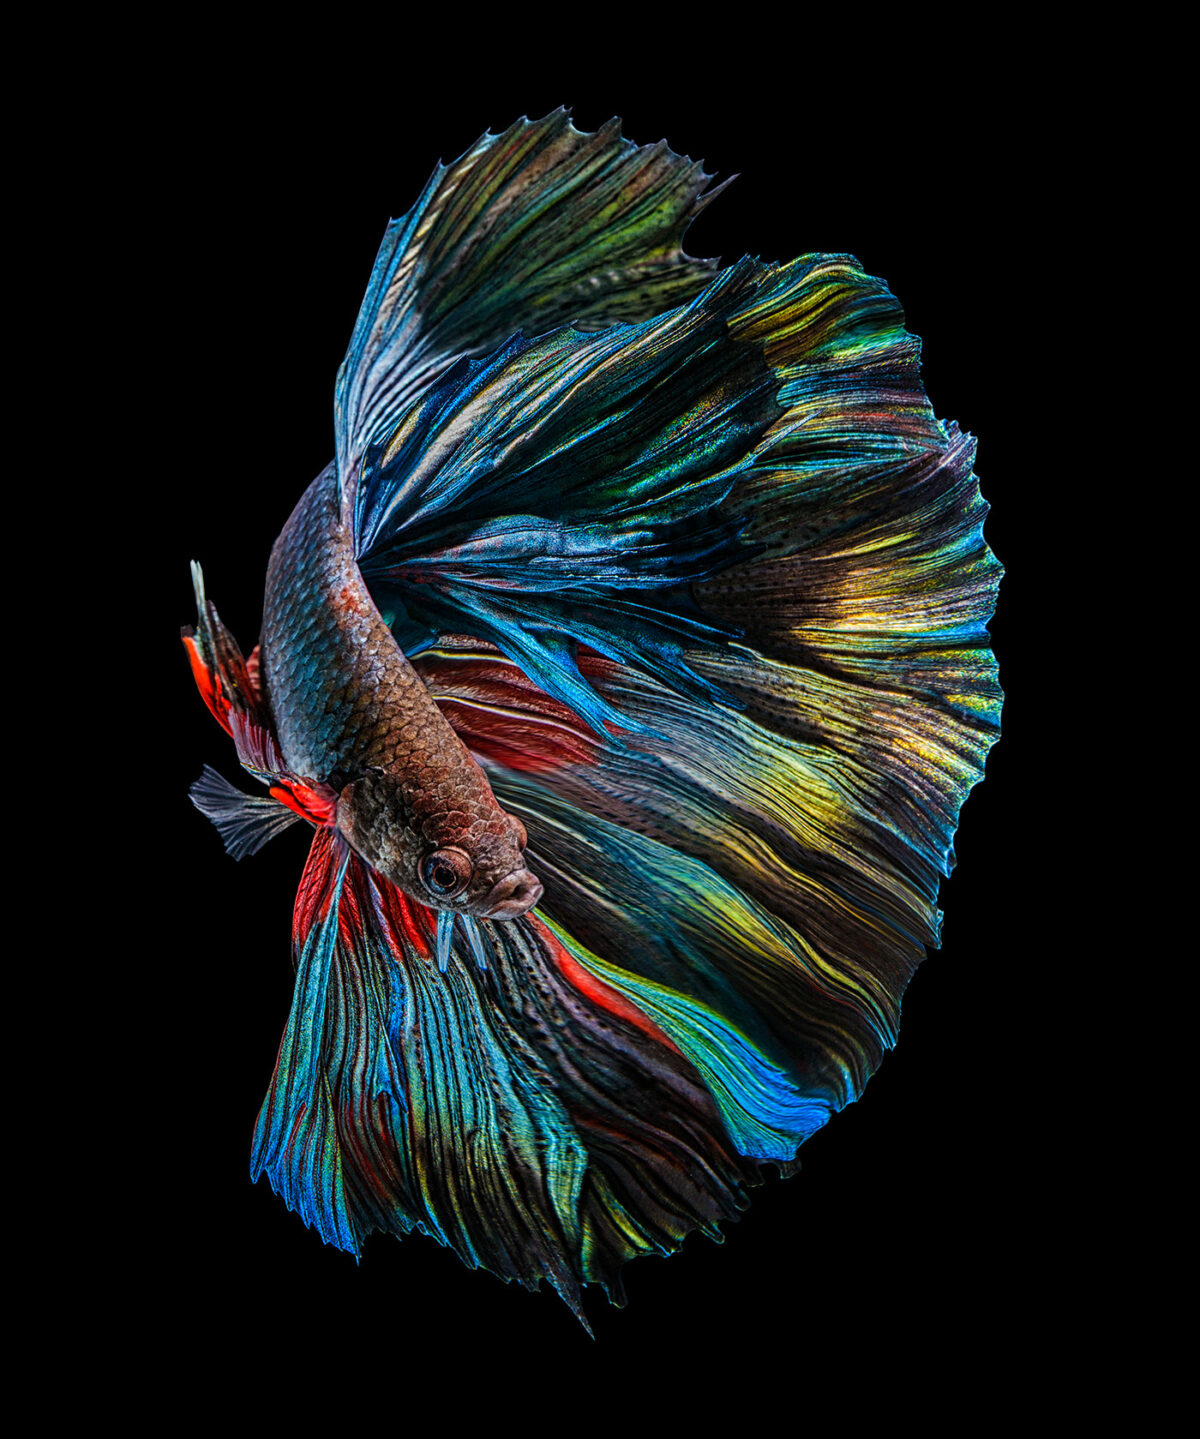 Marvelous Betta Fish Photography By Andi Halil (3)